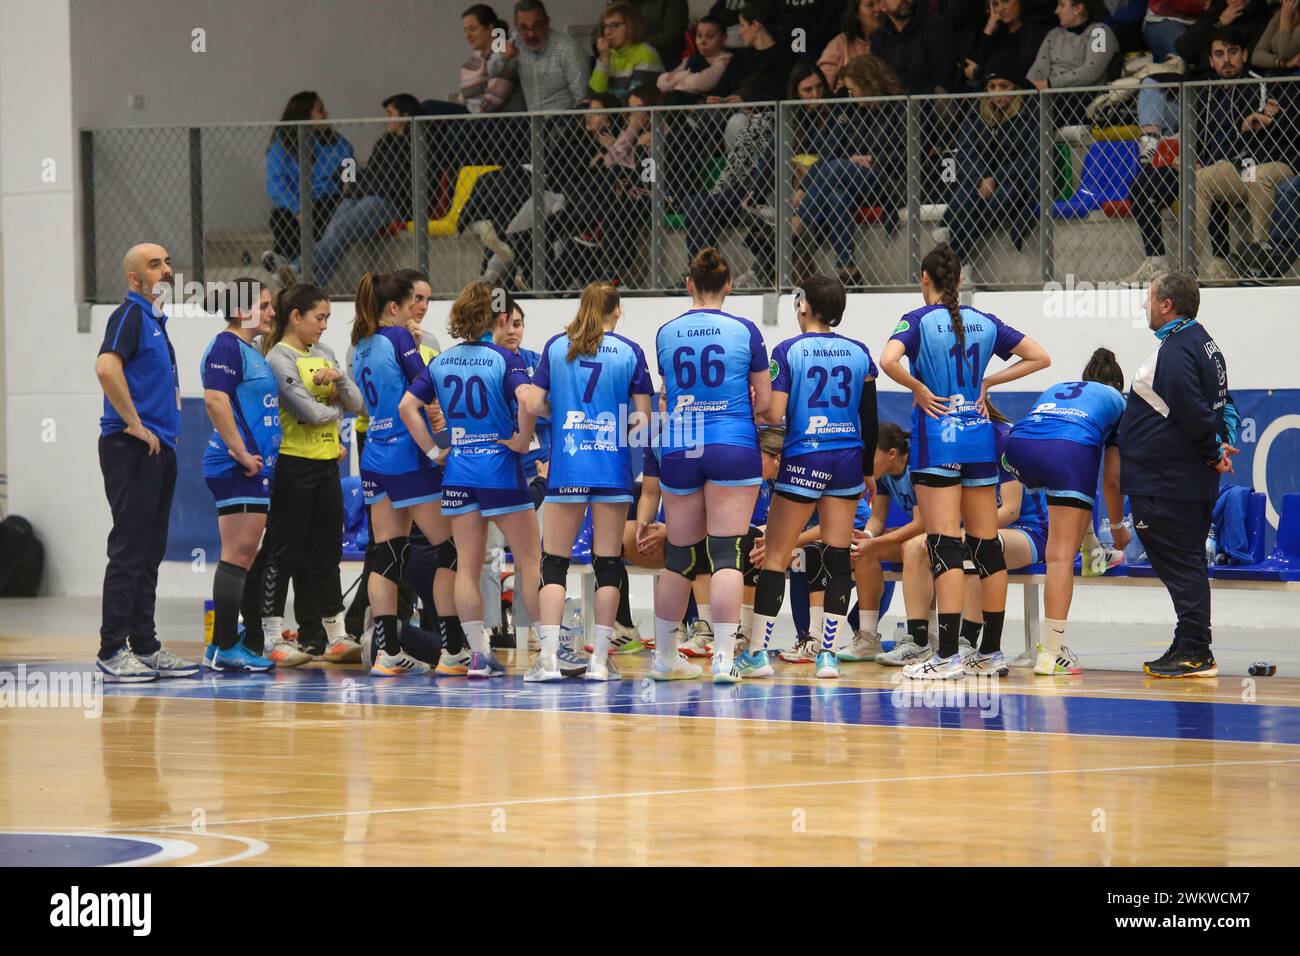 Oviedo, Spain, 22th February 2024: Lobas Global Atac Oviedo players receive instructions in a time-out during the 19th Matchday of the Liga Guerreras Iberdrola 2023-24 between Lobas Global Atac Oviedo and Replasa Beti-Onak, on February 22 of 2023, at the Florida Arena Municipal Sports Center, in Oviedo, Spain. Credit: Alberto Brevers / Alamy Live News. Stock Photo